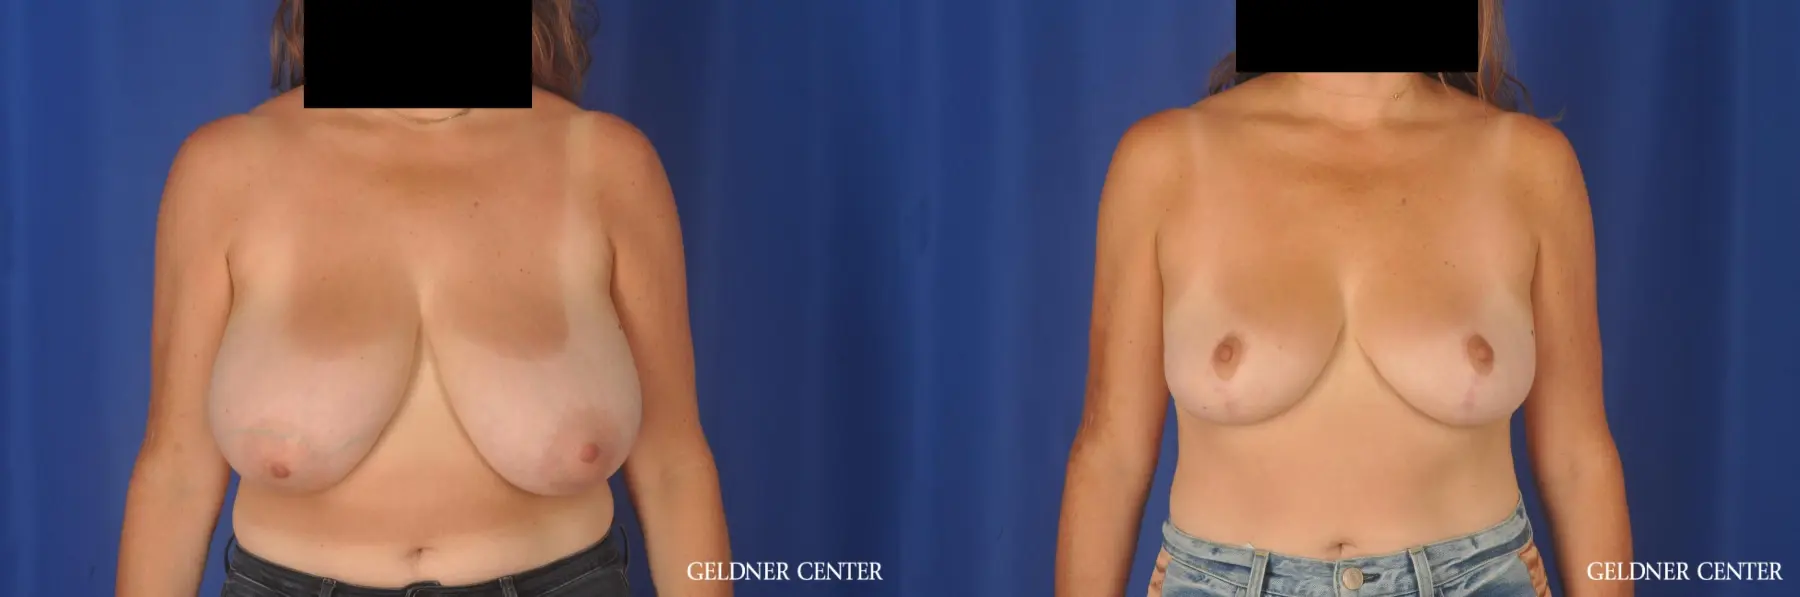 Breast Reduction: Patient 13 - Before and After 1